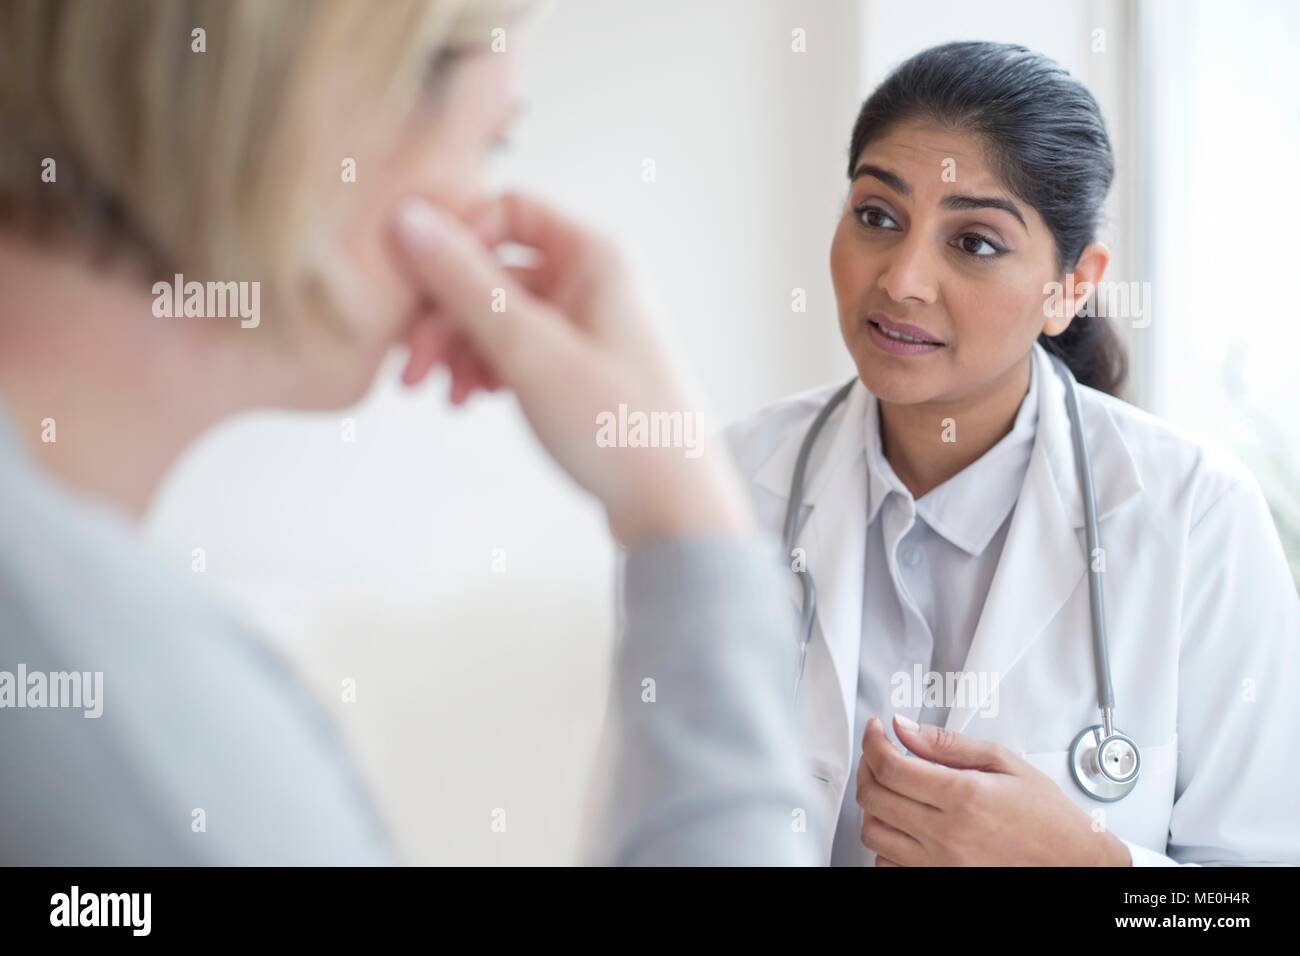 Female doctor talking to patient. Stock Photo